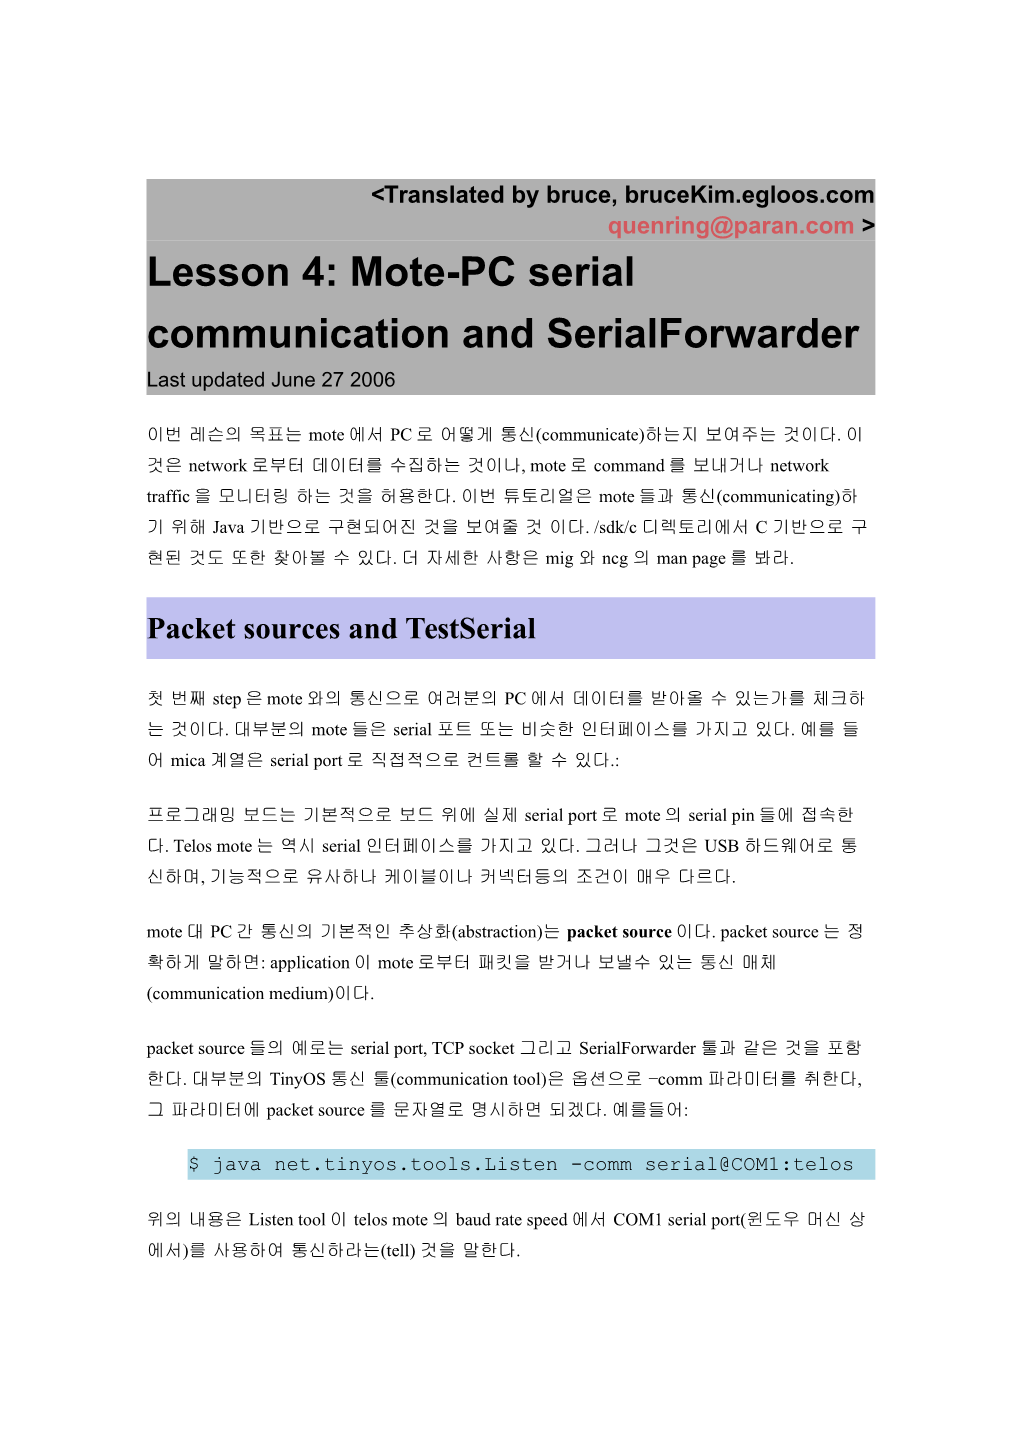 Lesson 4: Mote-PC Serial Communication and Serialforwarder